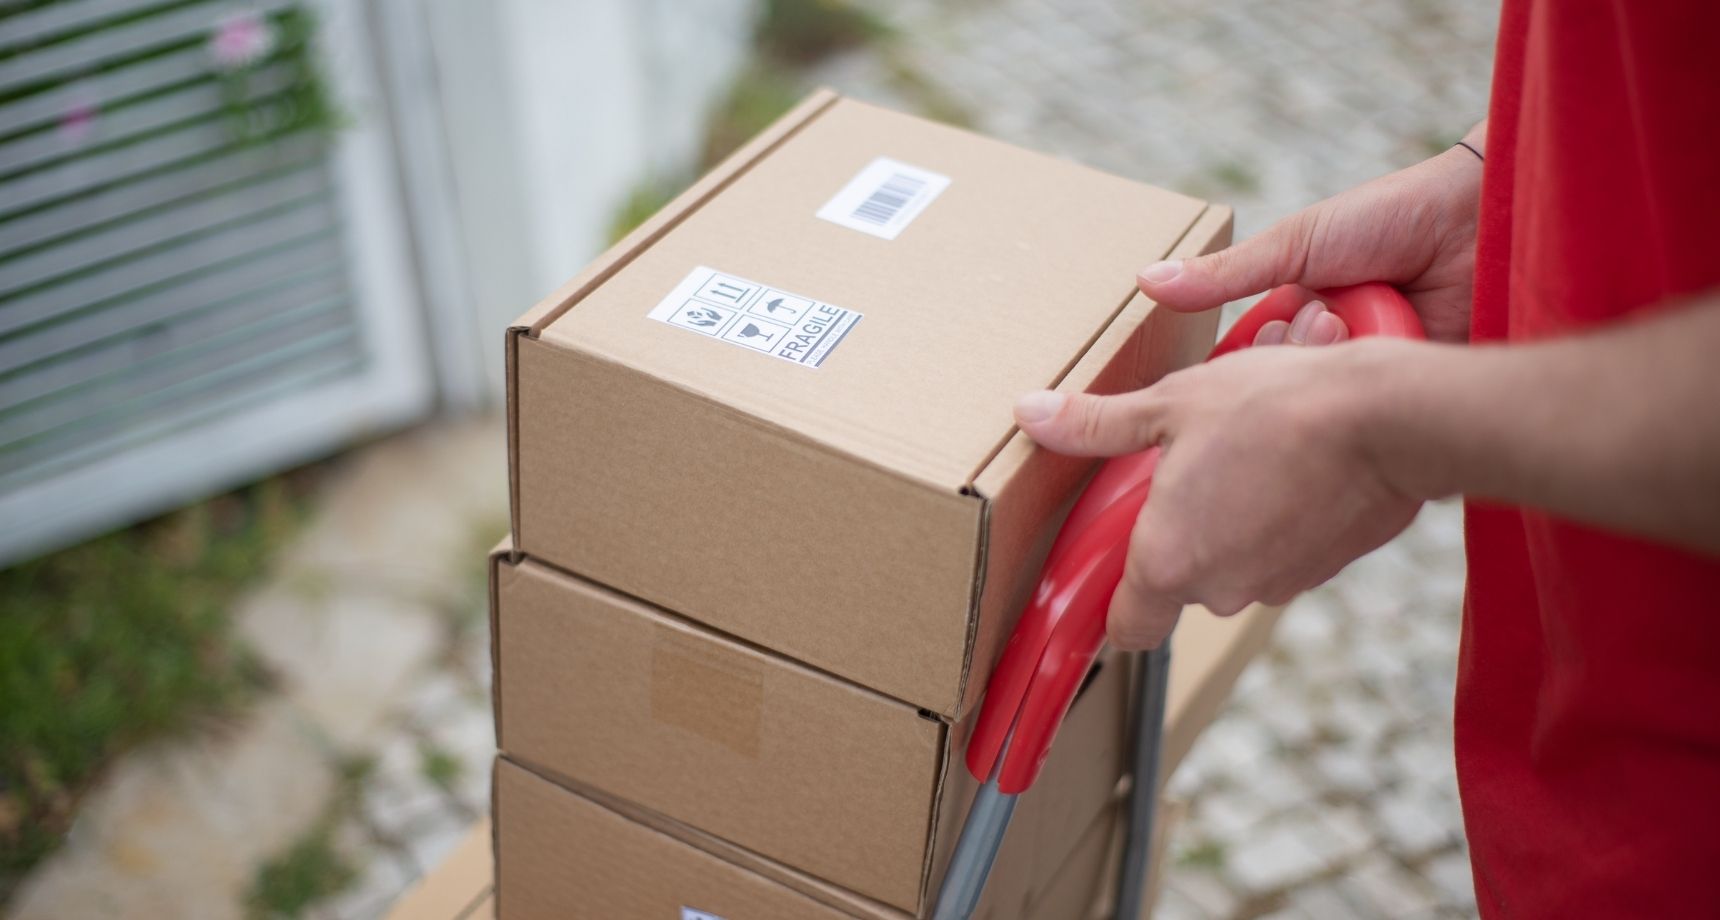 Offering seamless shipping practices is a must for D2C businesses.